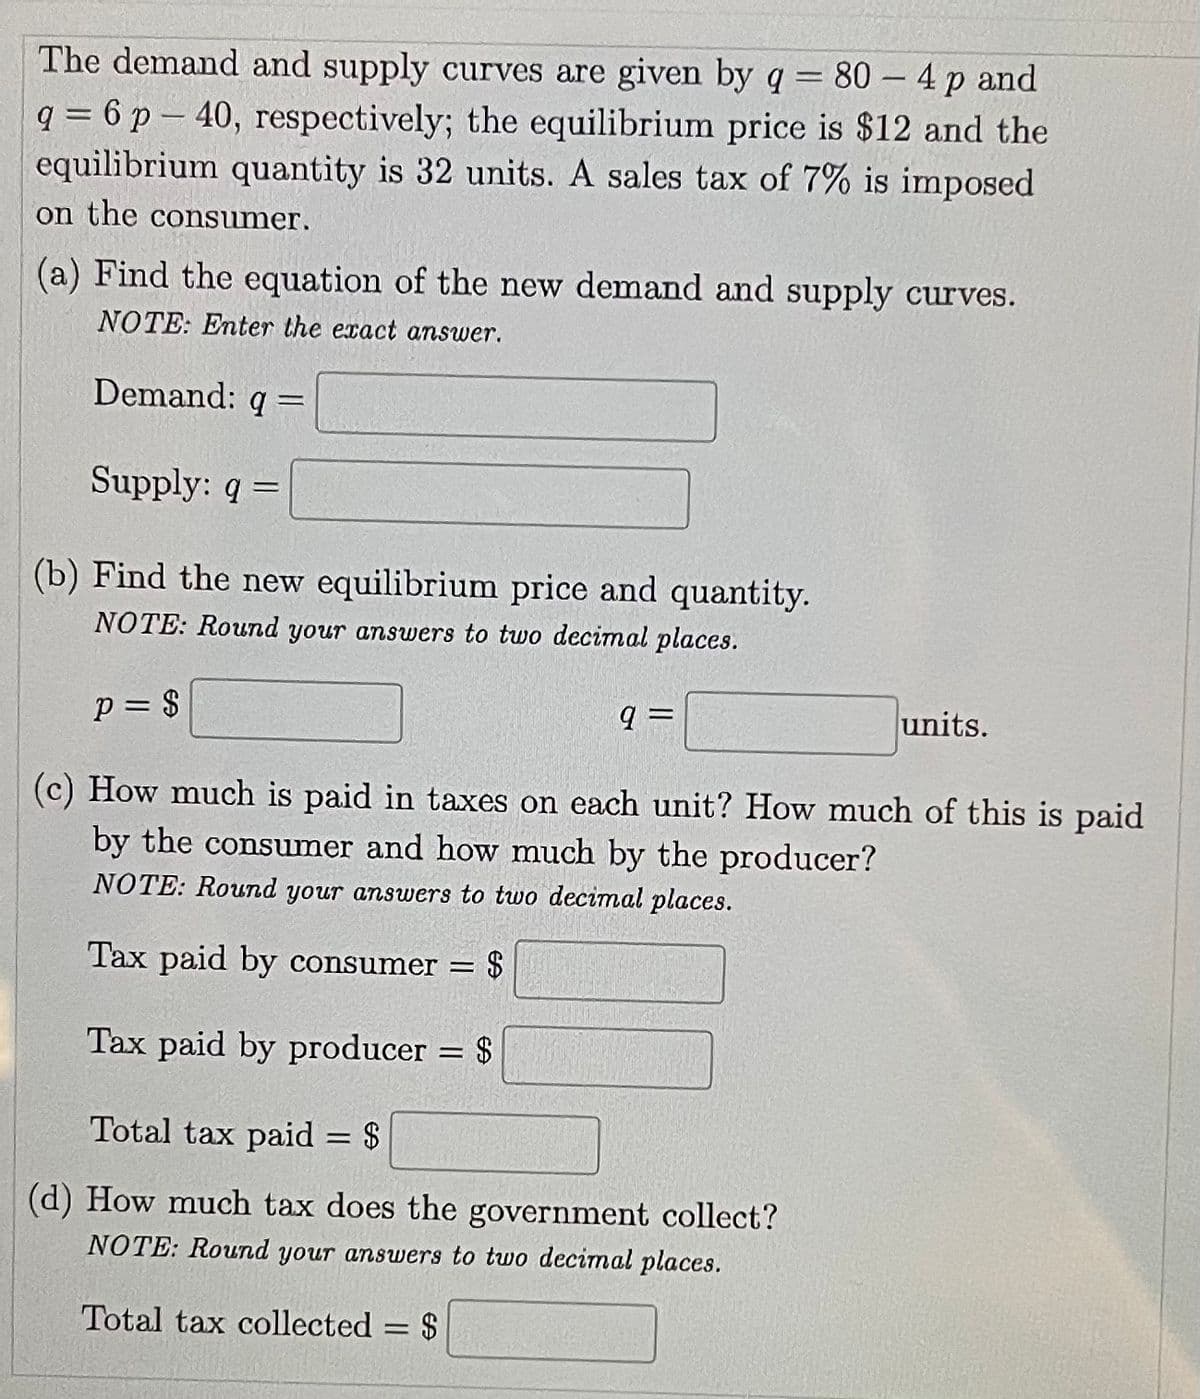 The demand and supply curves are given by q = 80 - 4 p and
q = 6 p-40, respectively; the equilibrium price is $12 and the
-
equilibrium quantity is 32 units. A sales tax of 7% is imposed
on the consumer.
(a) Find the equation of the new demand and supply curves.
NOTE: Enter the exact answer.
Demand: q =
Supply: q =
(b) Find the new equilibrium price and quantity.
NOTE: Round your answers to two decimal places.
P = $
q=
units.
(c) How much is paid in taxes on each unit? How much of this is paid
by the consumer and how much by the producer?
NOTE: Round your answers to two decimal places.
Tax paid by consumer =
= $
Tax paid by producer = $
Total tax paid = $
(d) How much tax does the government collect?
NOTE: Round your answers to two decimal places.
Total tax collected = $